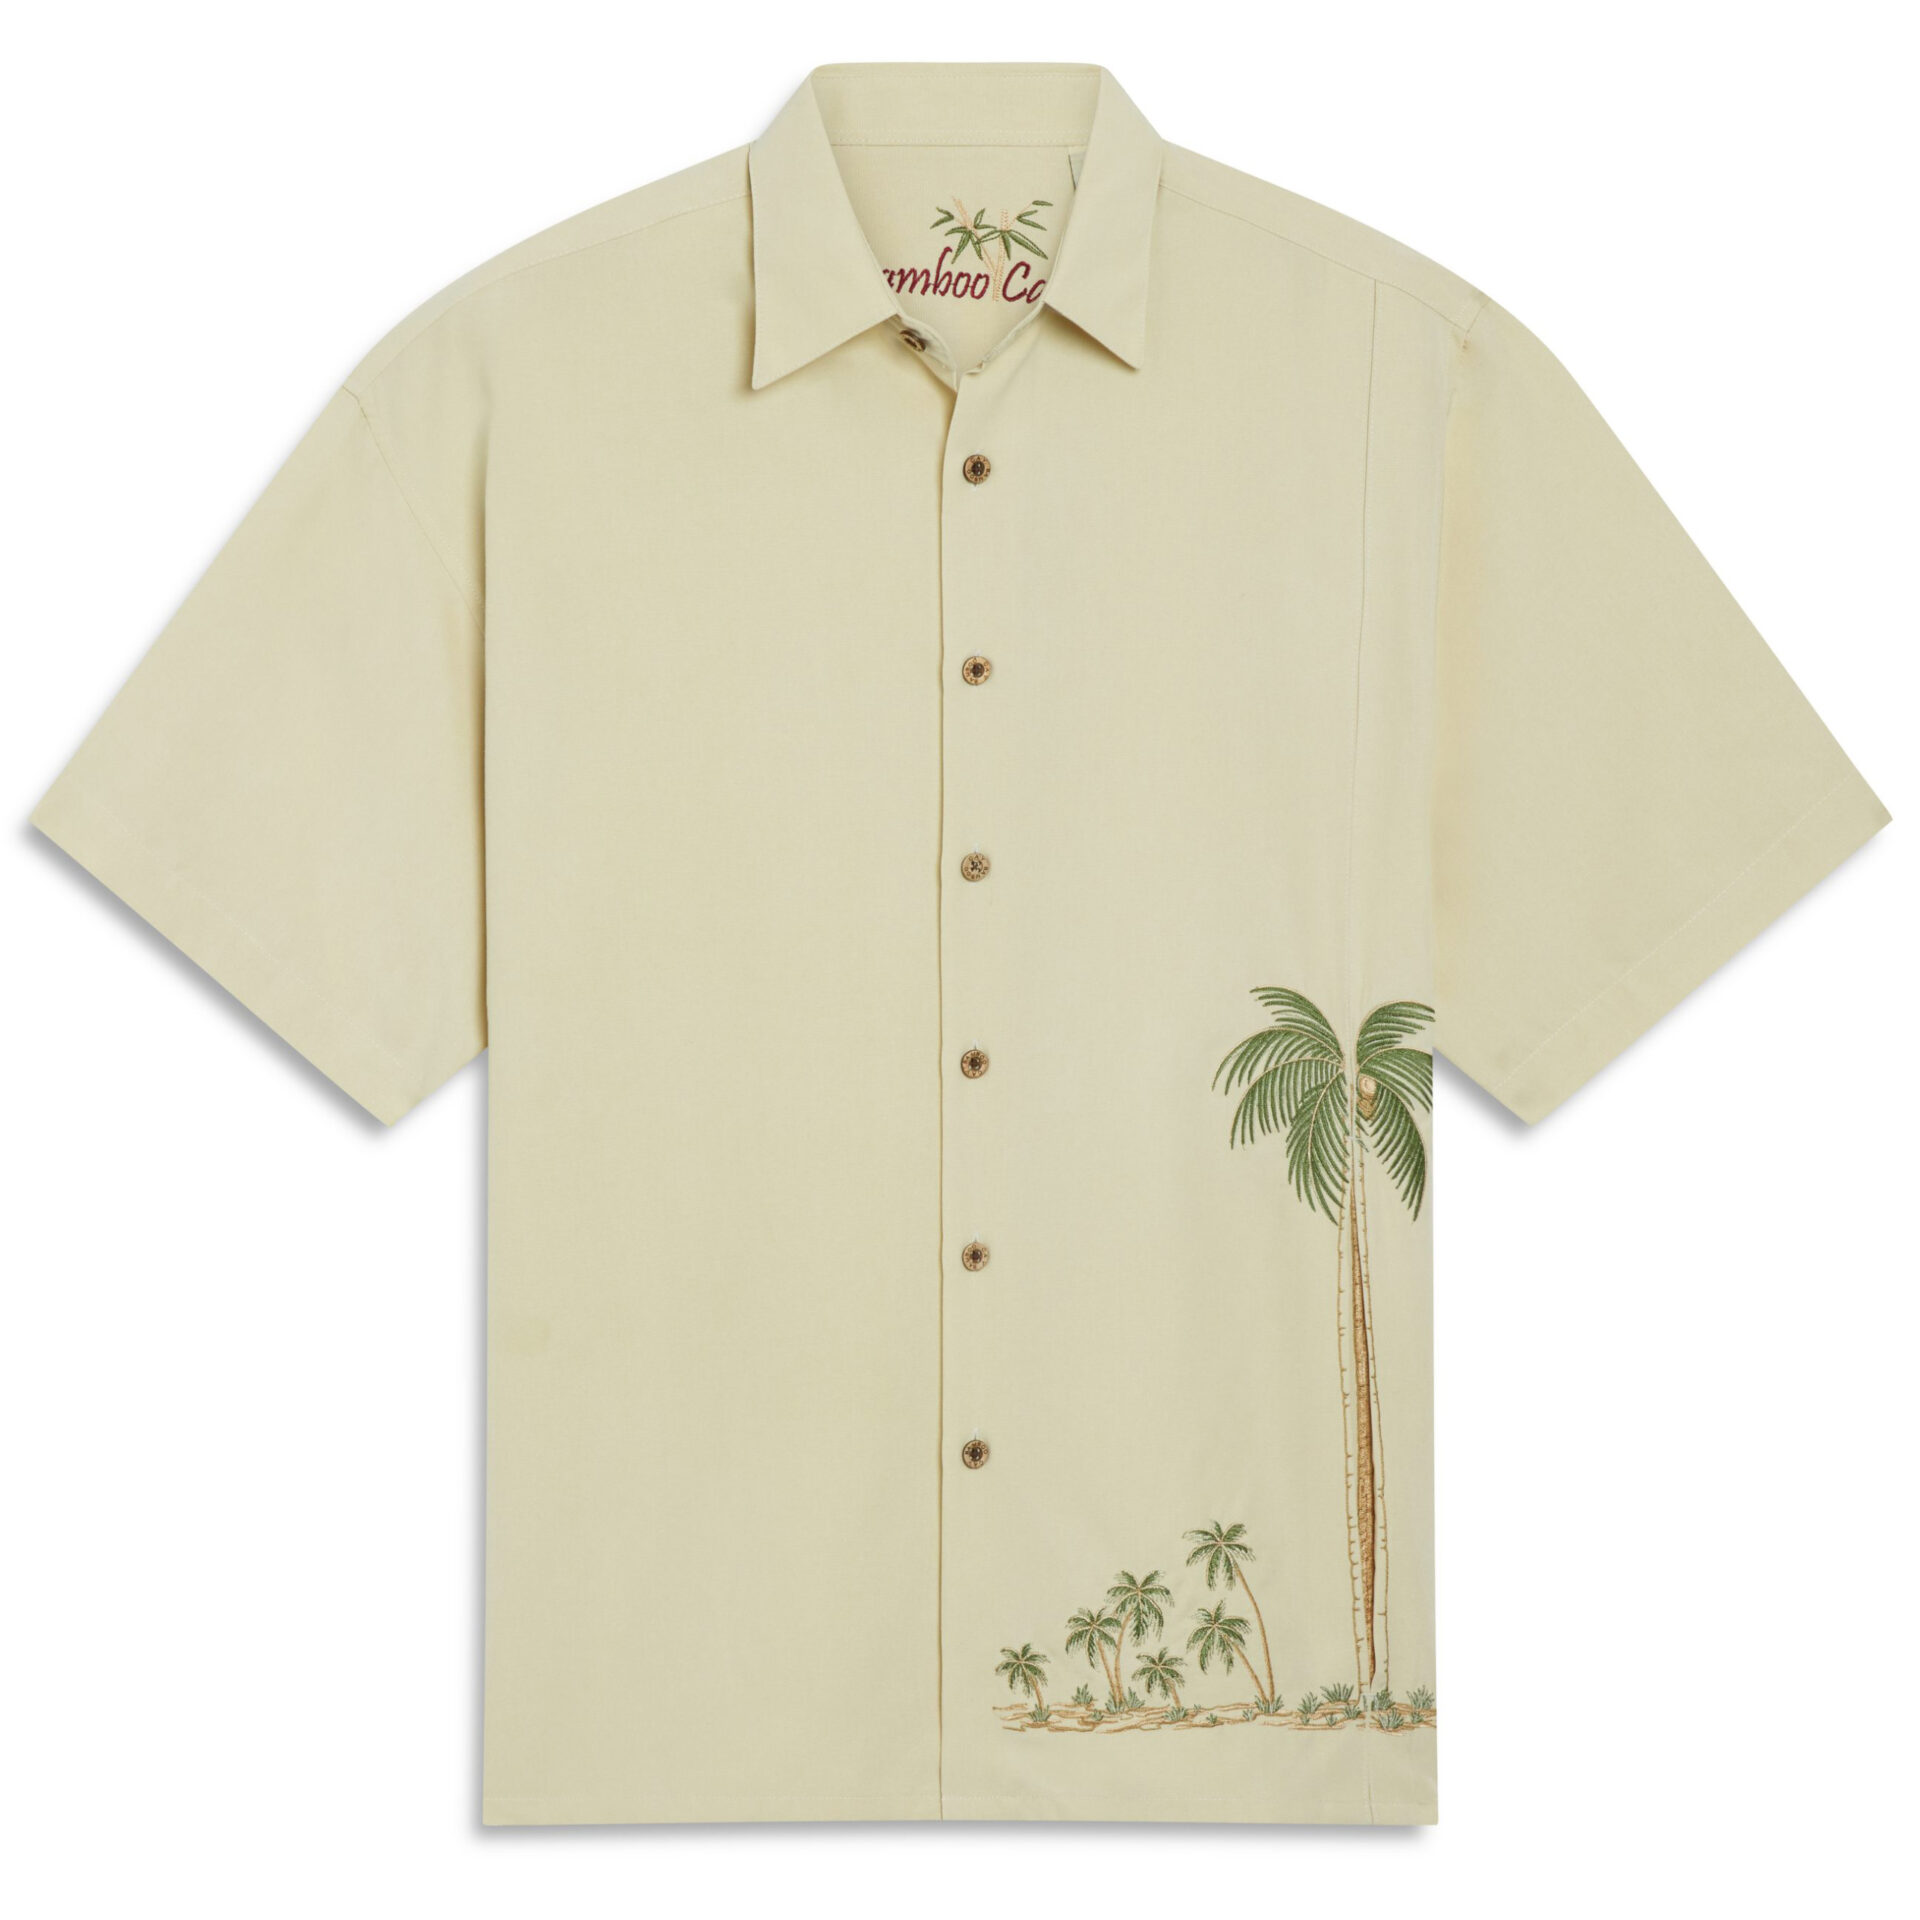 Bamboo-Cay-Mens-Shirt-Elevated-Palms-Cream-Front-View